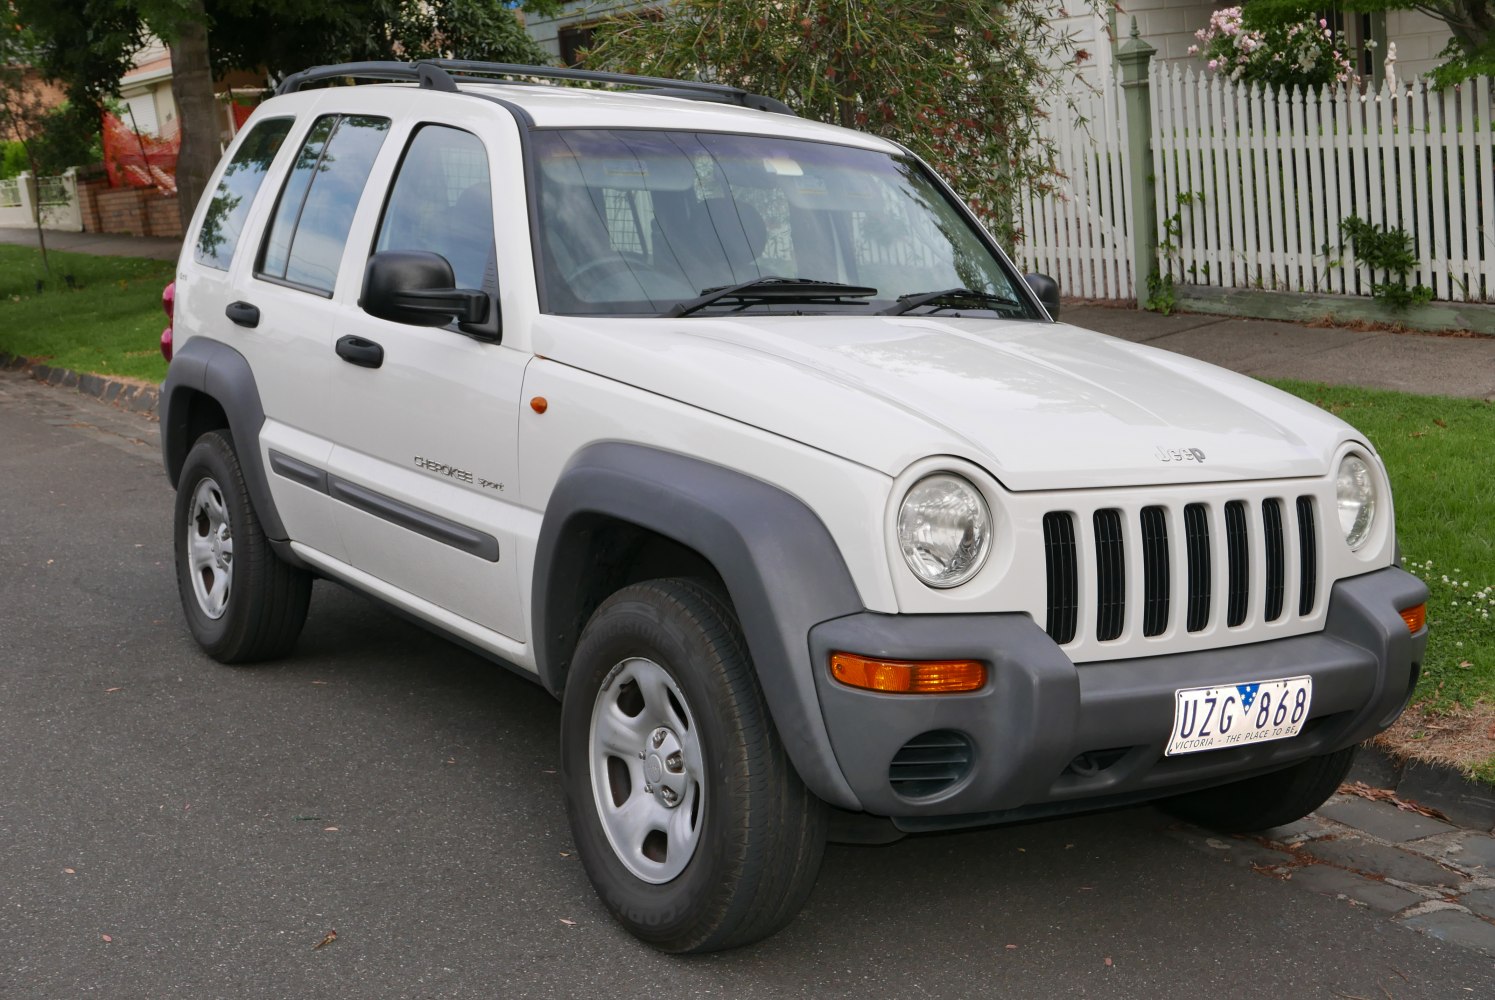 https://totalrenting.es/wp-content/uploads/2022/10/jeep-cherokee-iii-kj-2002-2-4i-16v-147-cv-awd-todoterreno.png